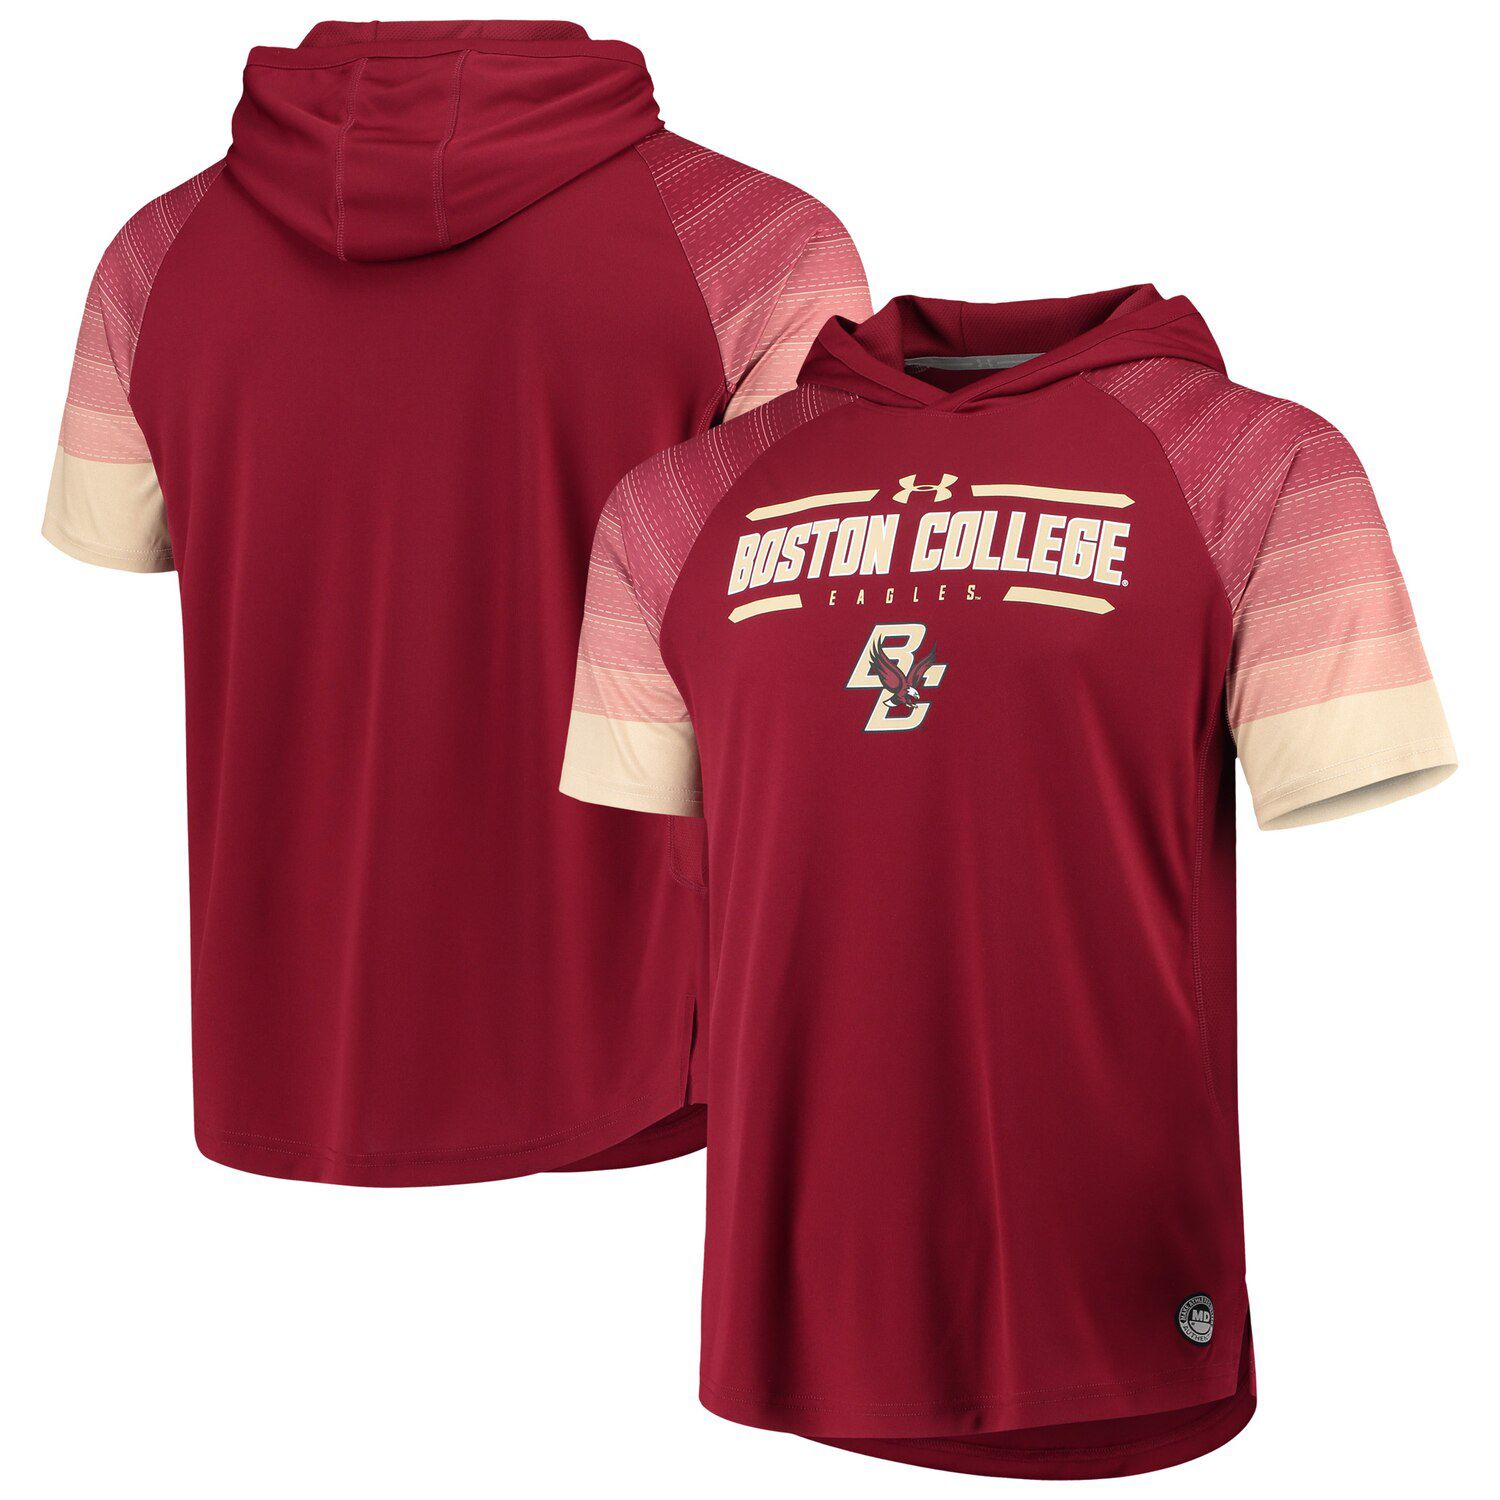 under armour maroon t shirt